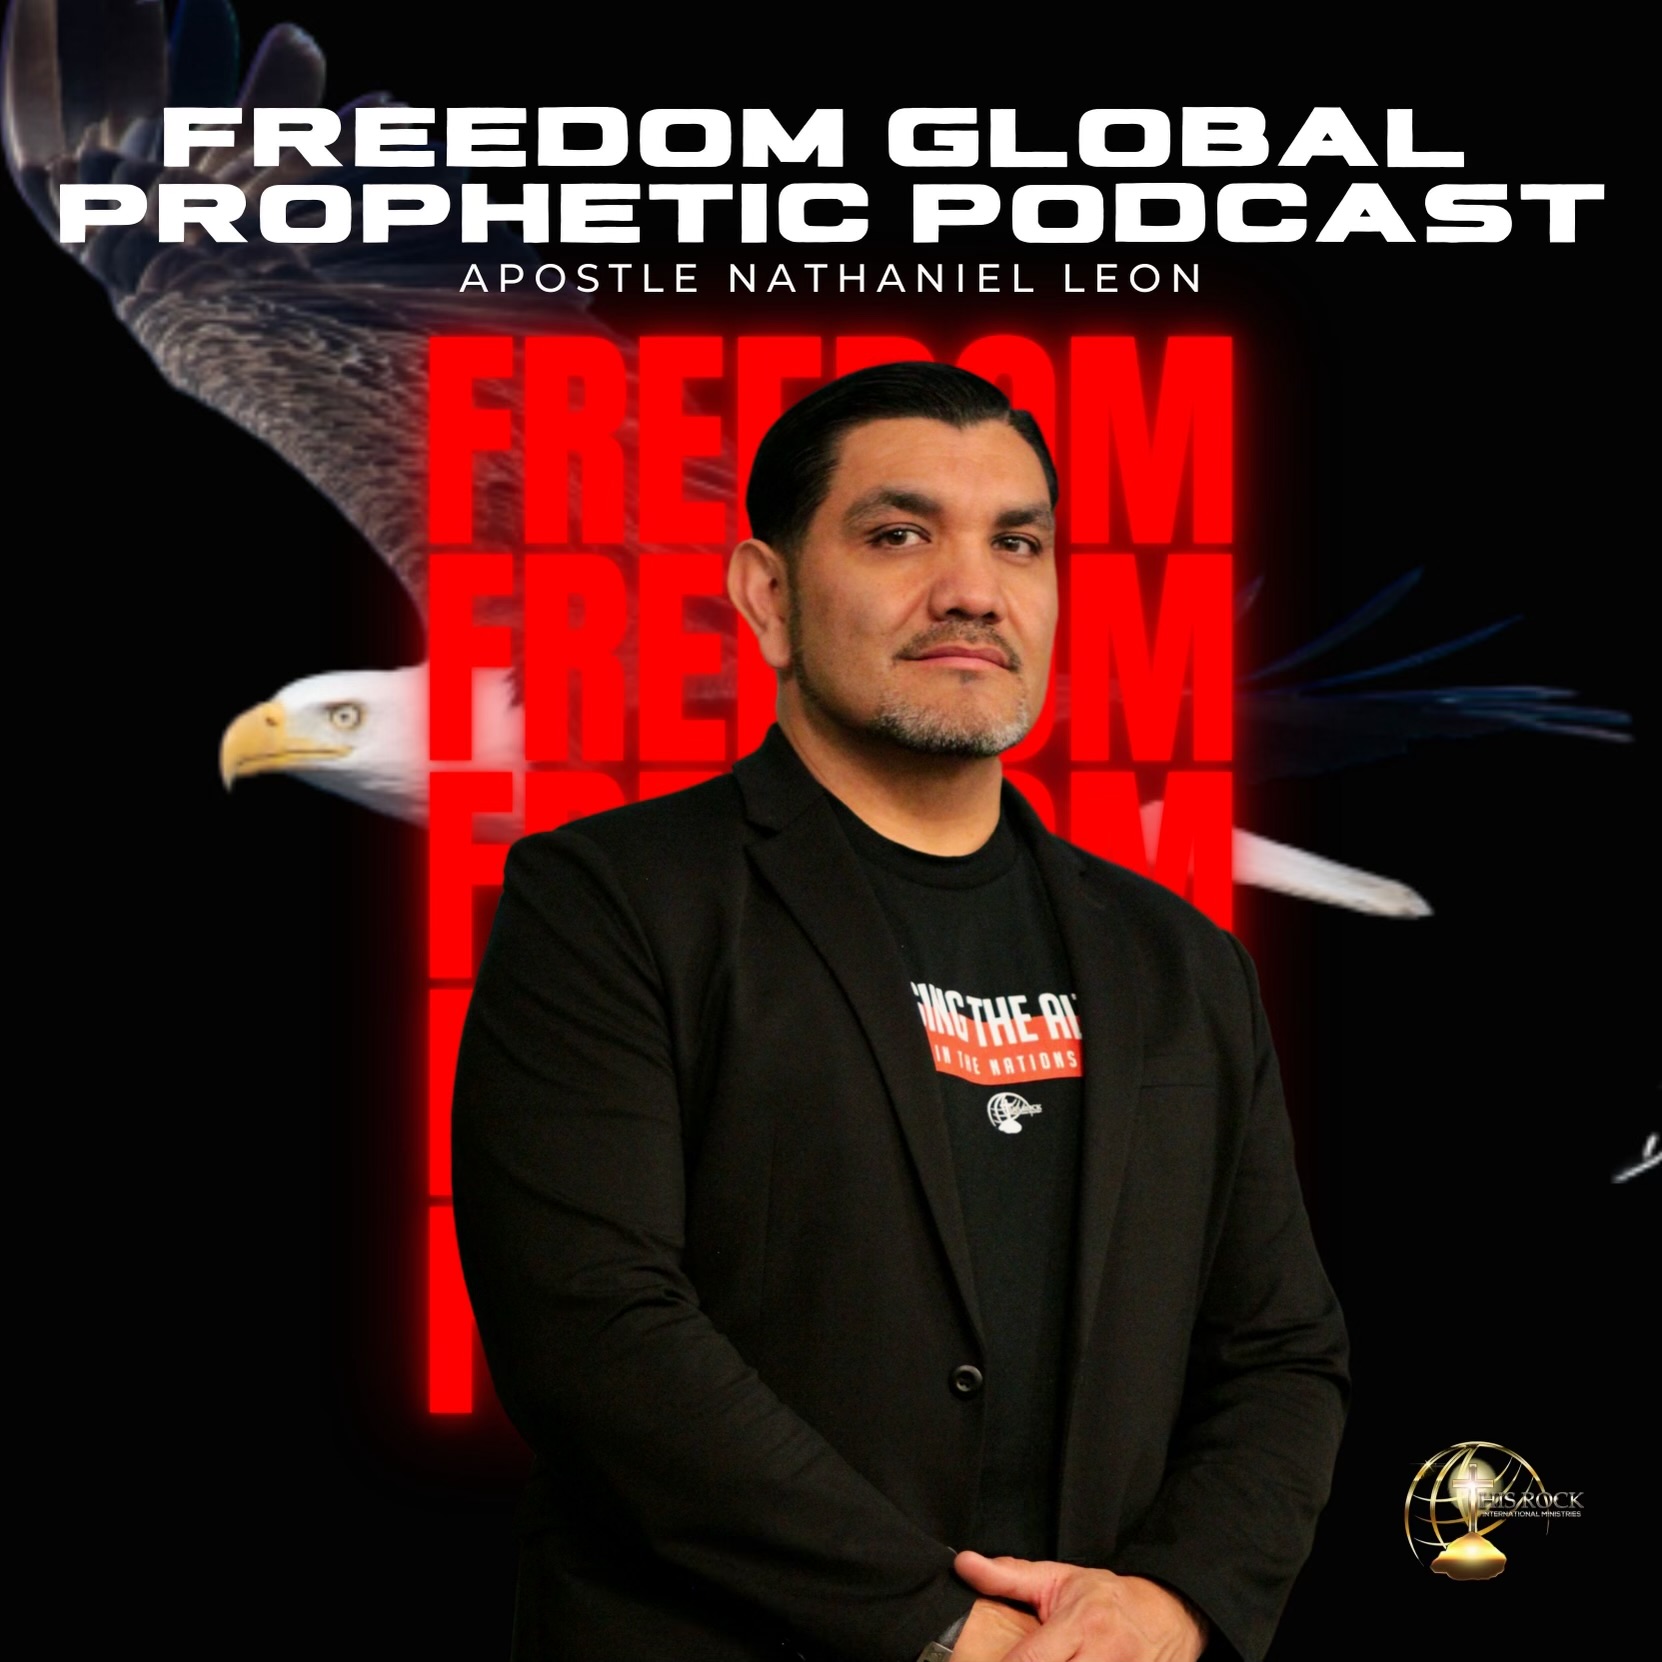 Introducing Freedom Global Prophetic Podcast (S1Ep1)